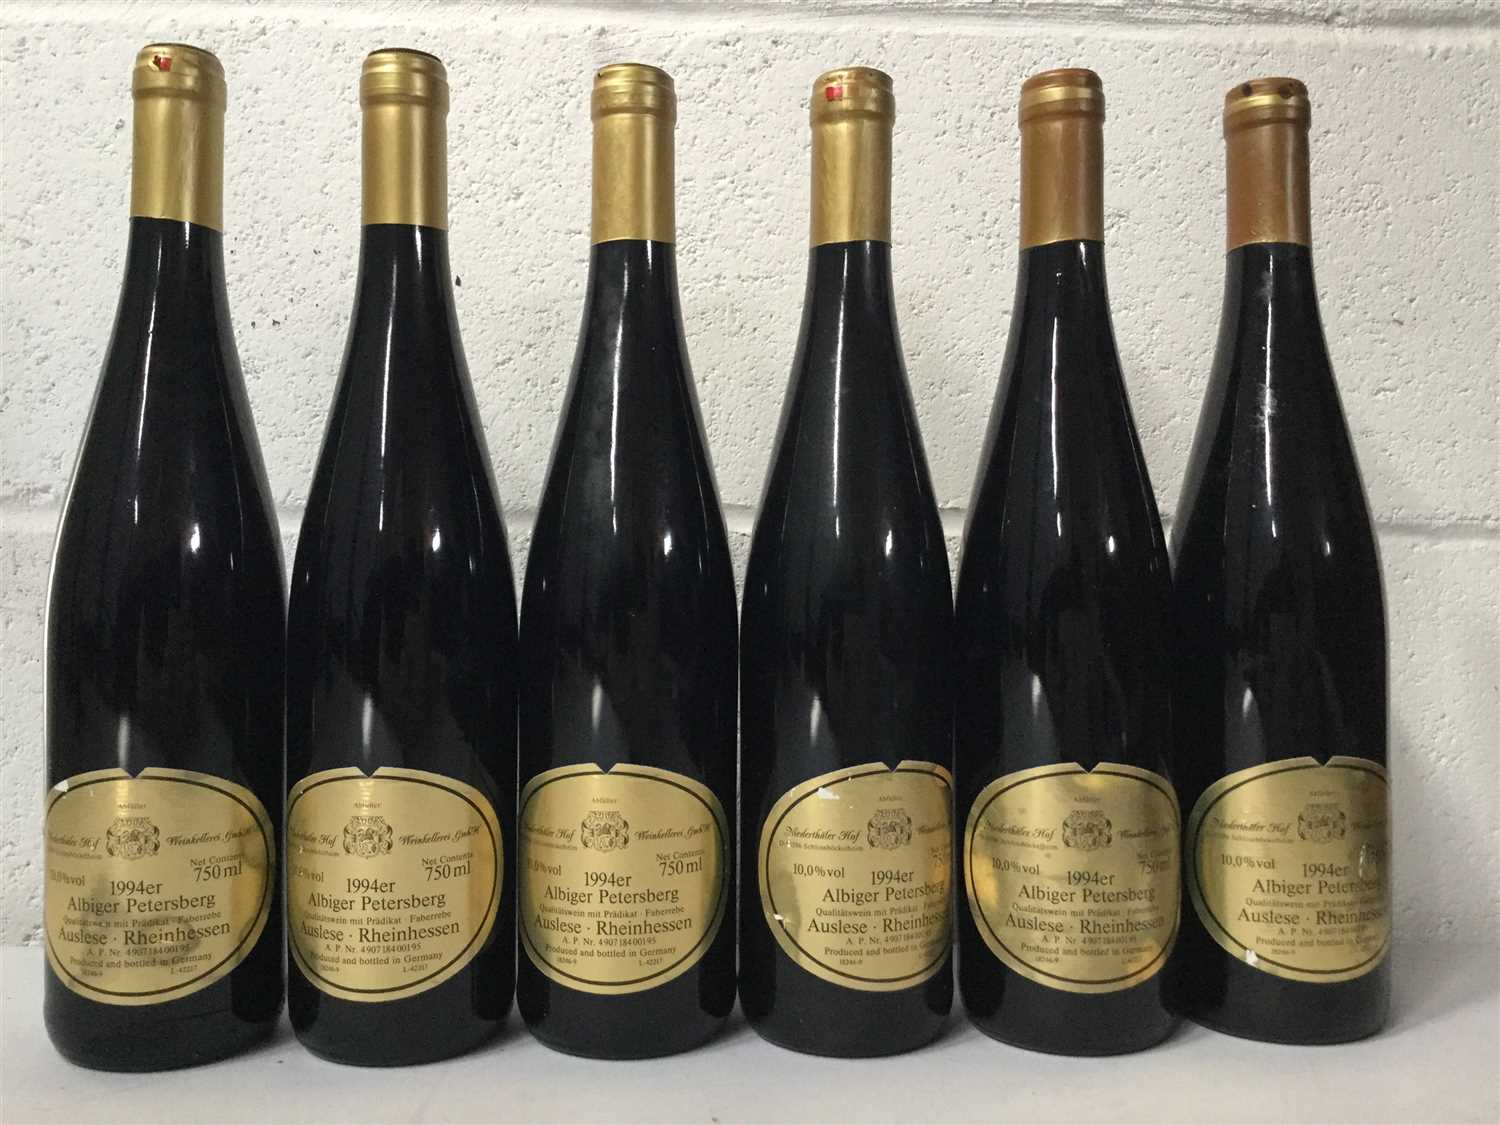 Lot 2058 - SIX BOTTLES OF ALBIGER 1994 AUSLESE